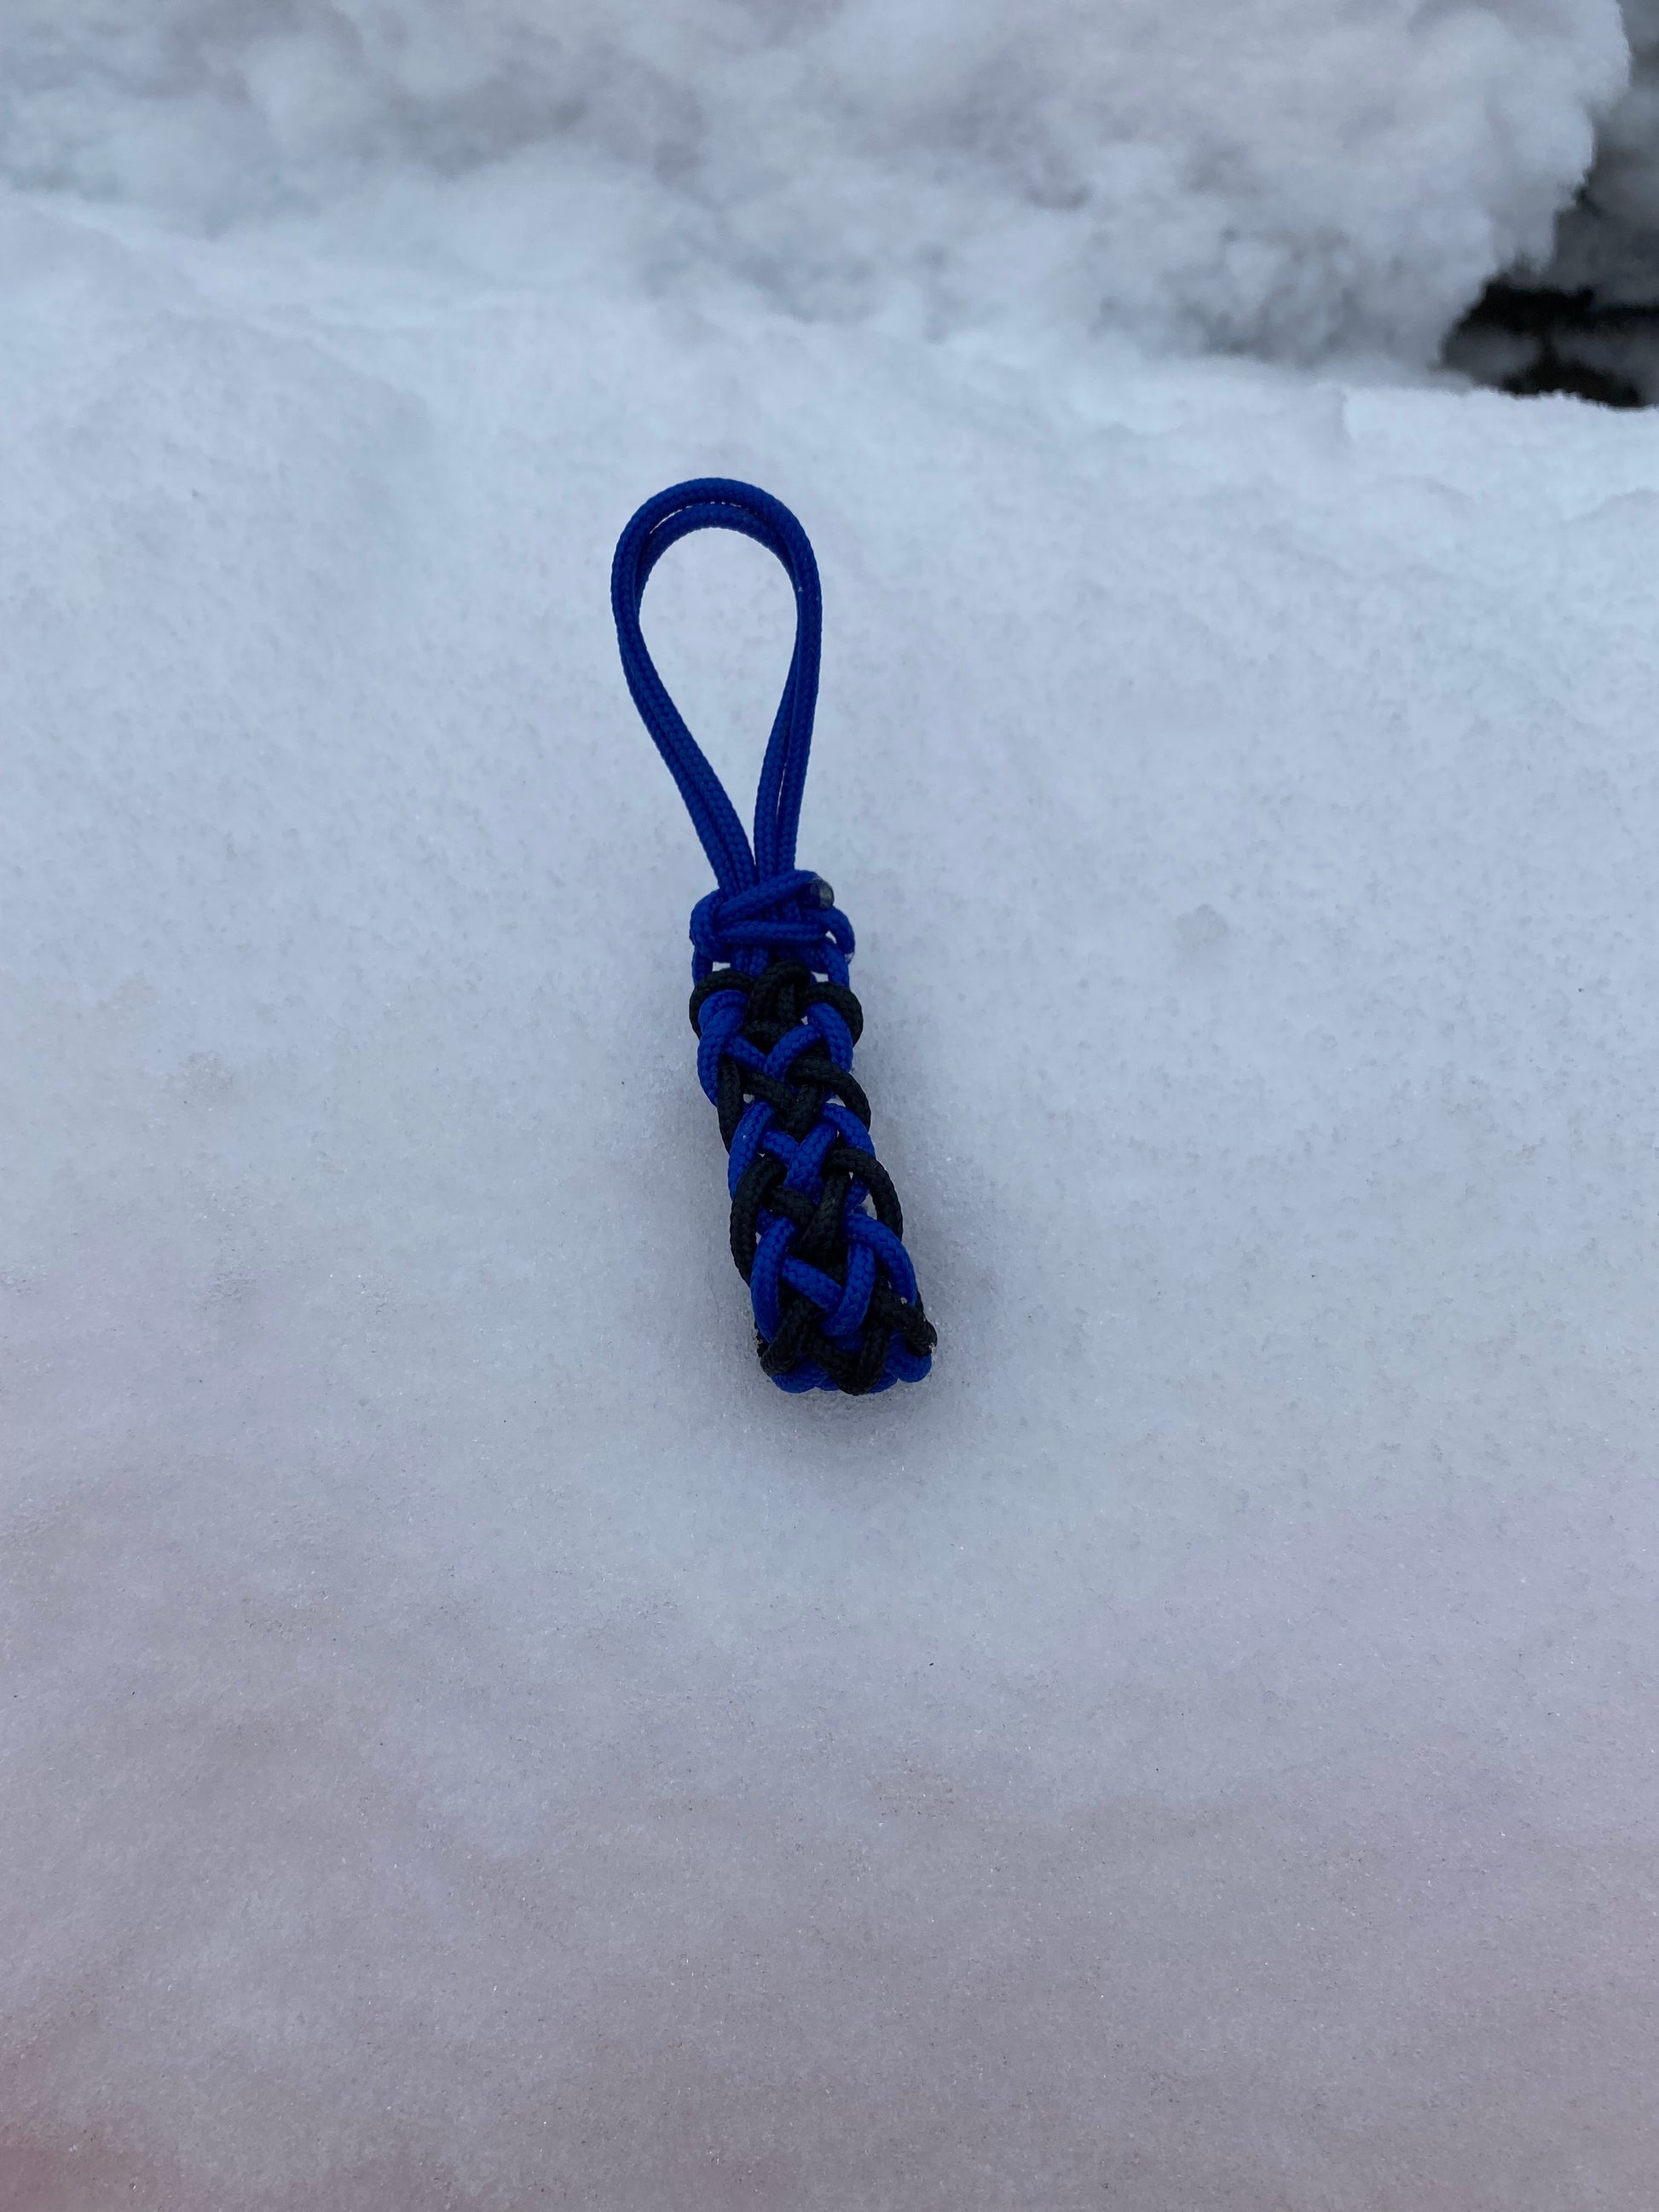 Customized Paracord Trilobite Key Fob Zipper Pull made from 550 paraco –  Adored Paracord